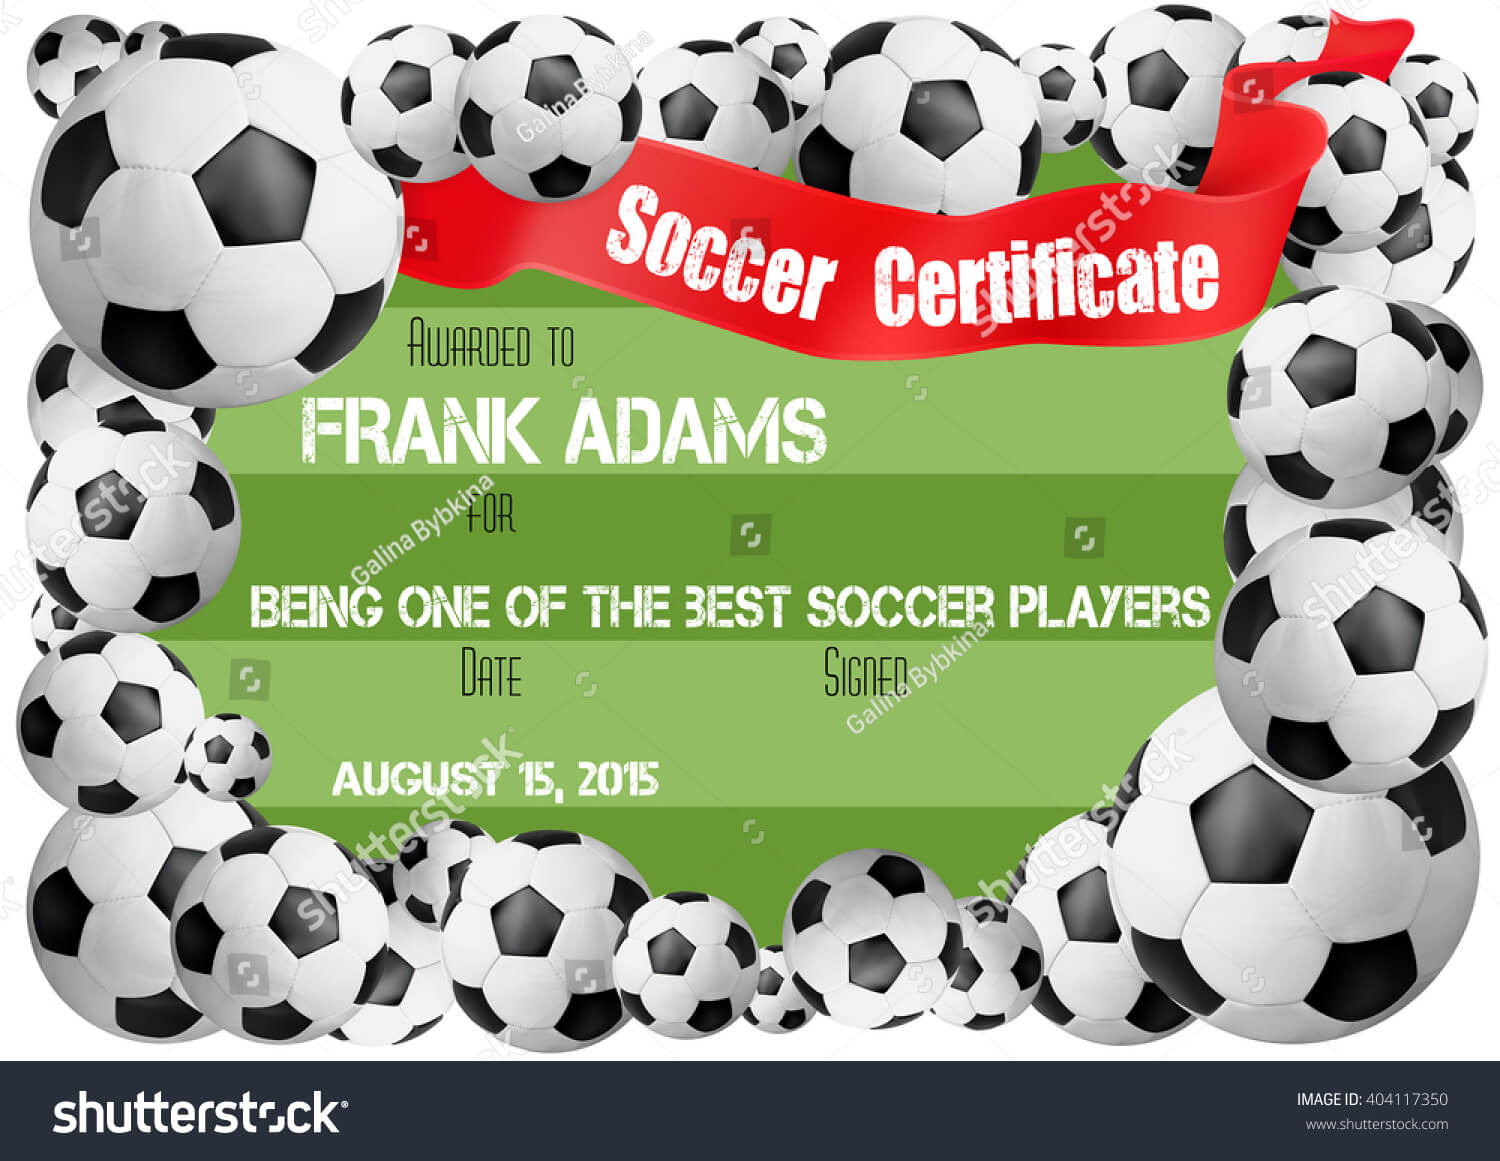 Soccer Certificate Template Football Ball Icons Stock Vector For Soccer Award Certificate Templates Free